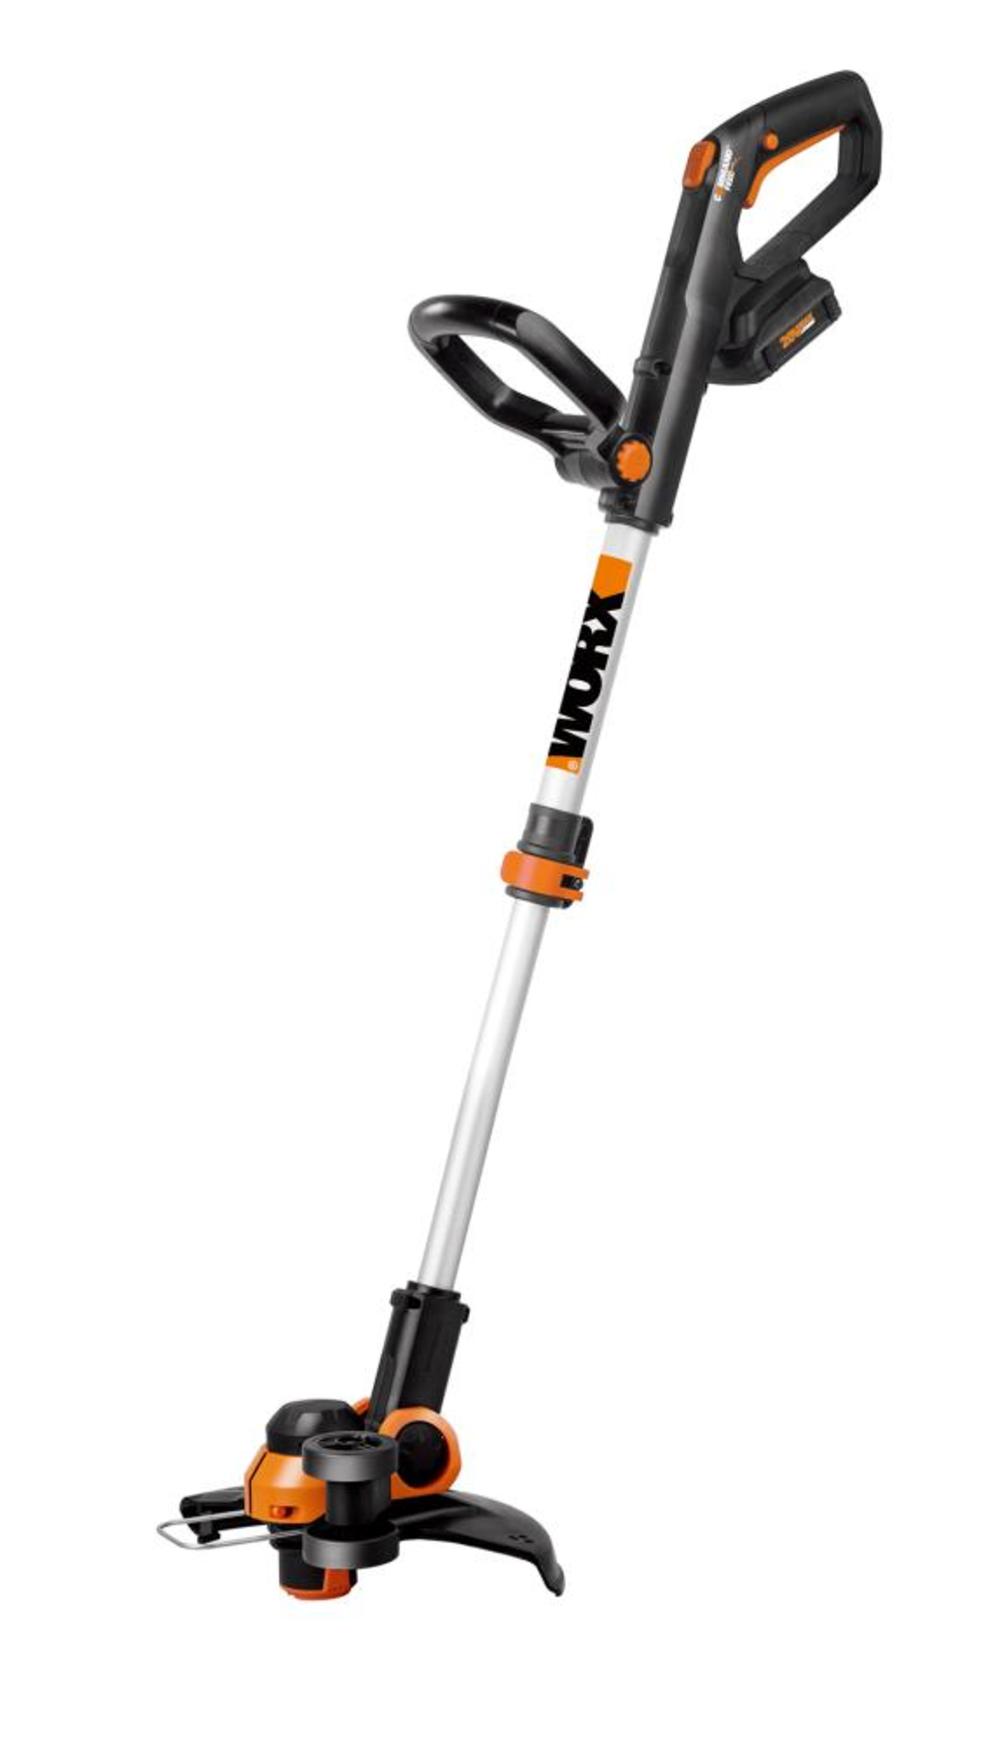 Worx GT 3.0 20 V Grass Trimmer/Edger with Command Feed WG163 - Acme Tools